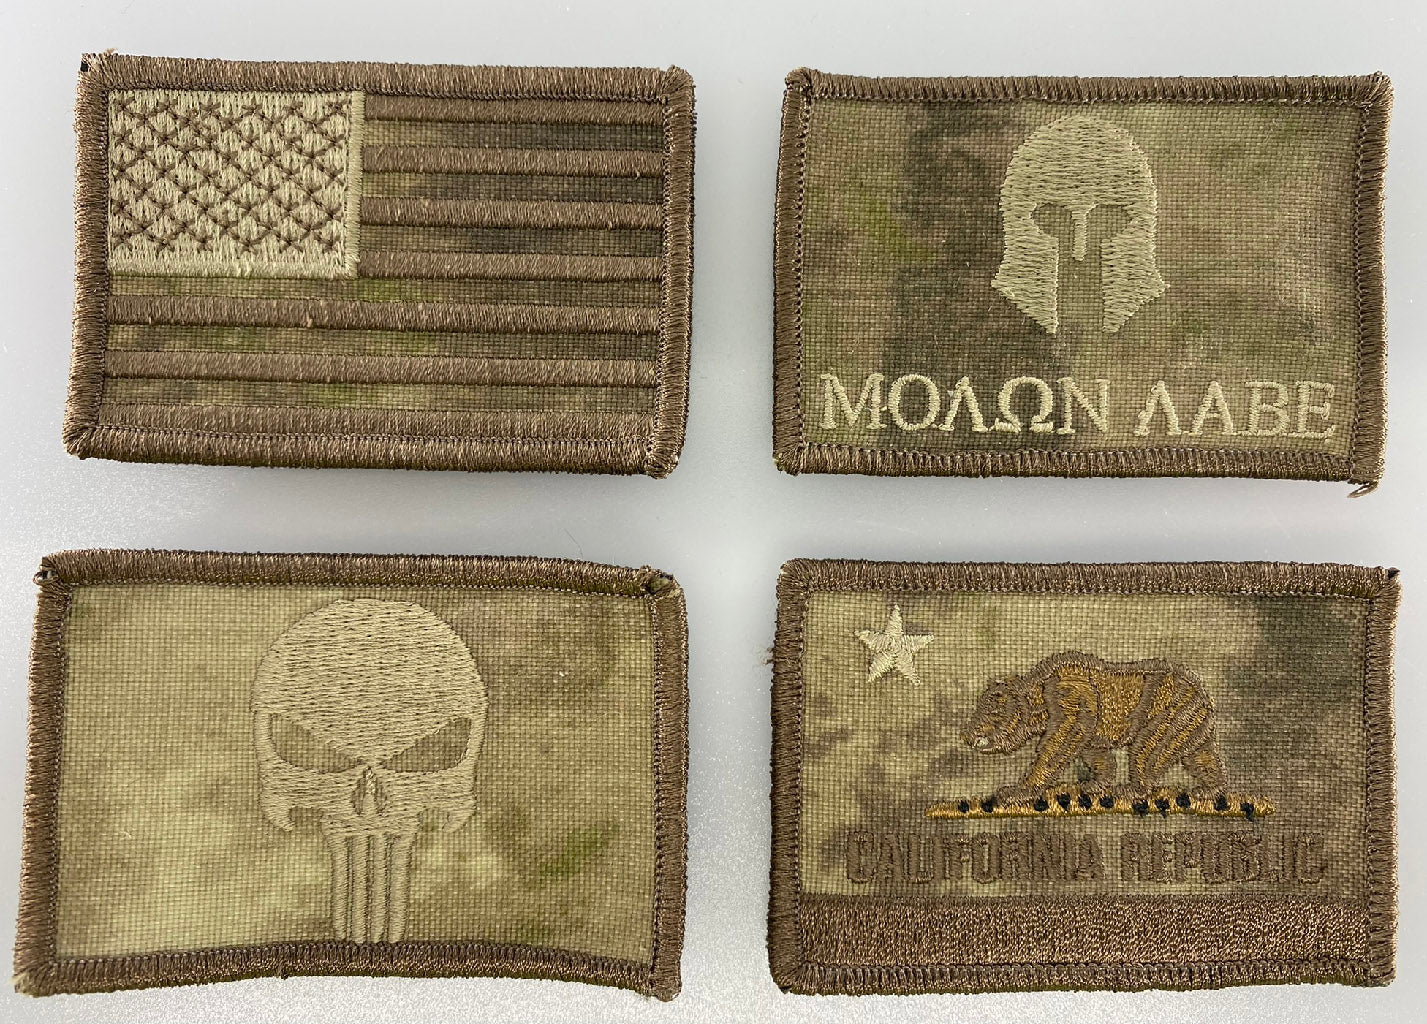 ATACS-AU Camouflage Tactical Patch Collection